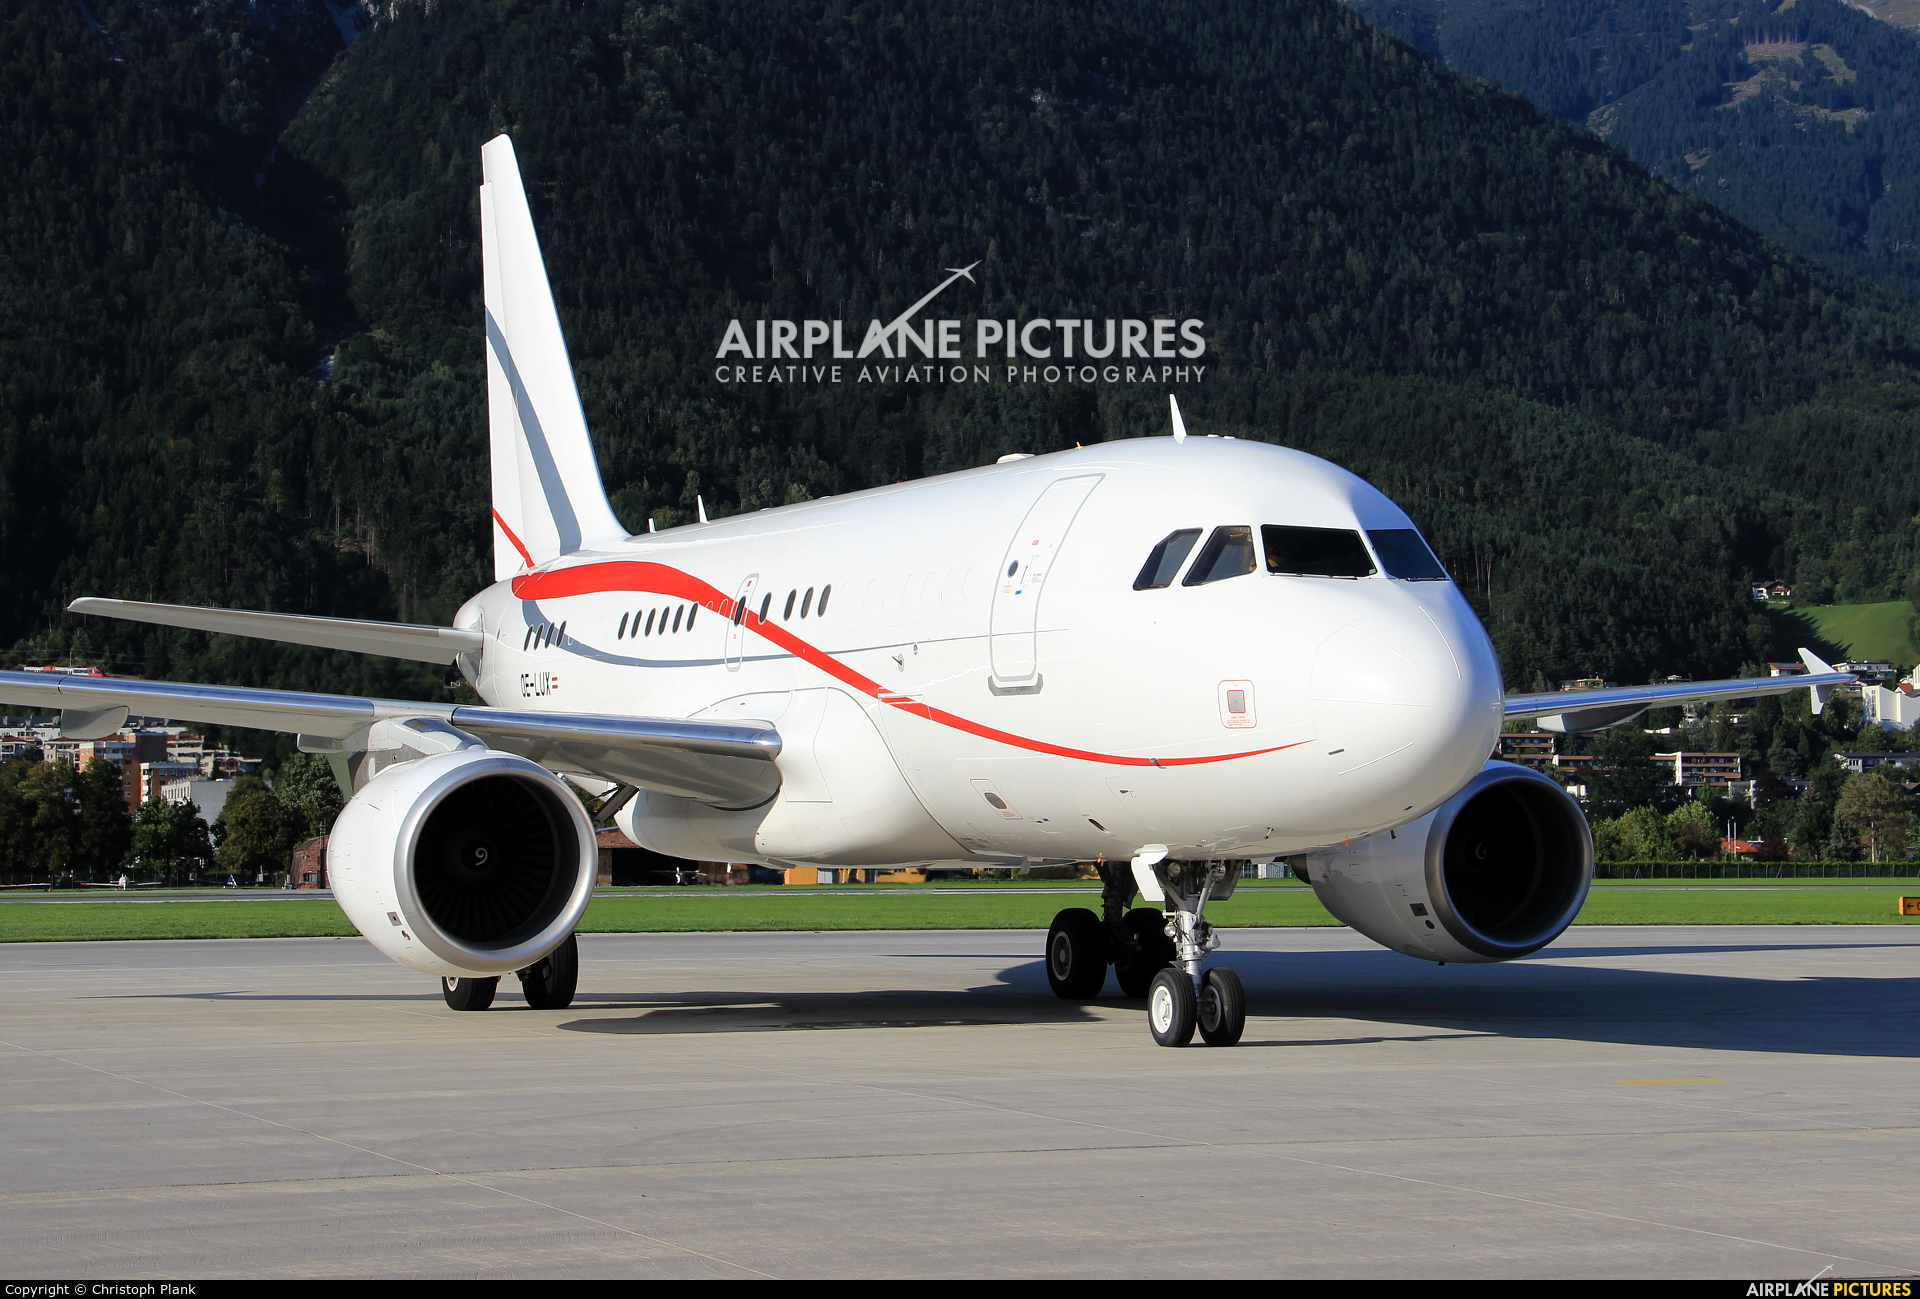 Tyrolean Jet Service OE-LUX aircraft at Innsbruck